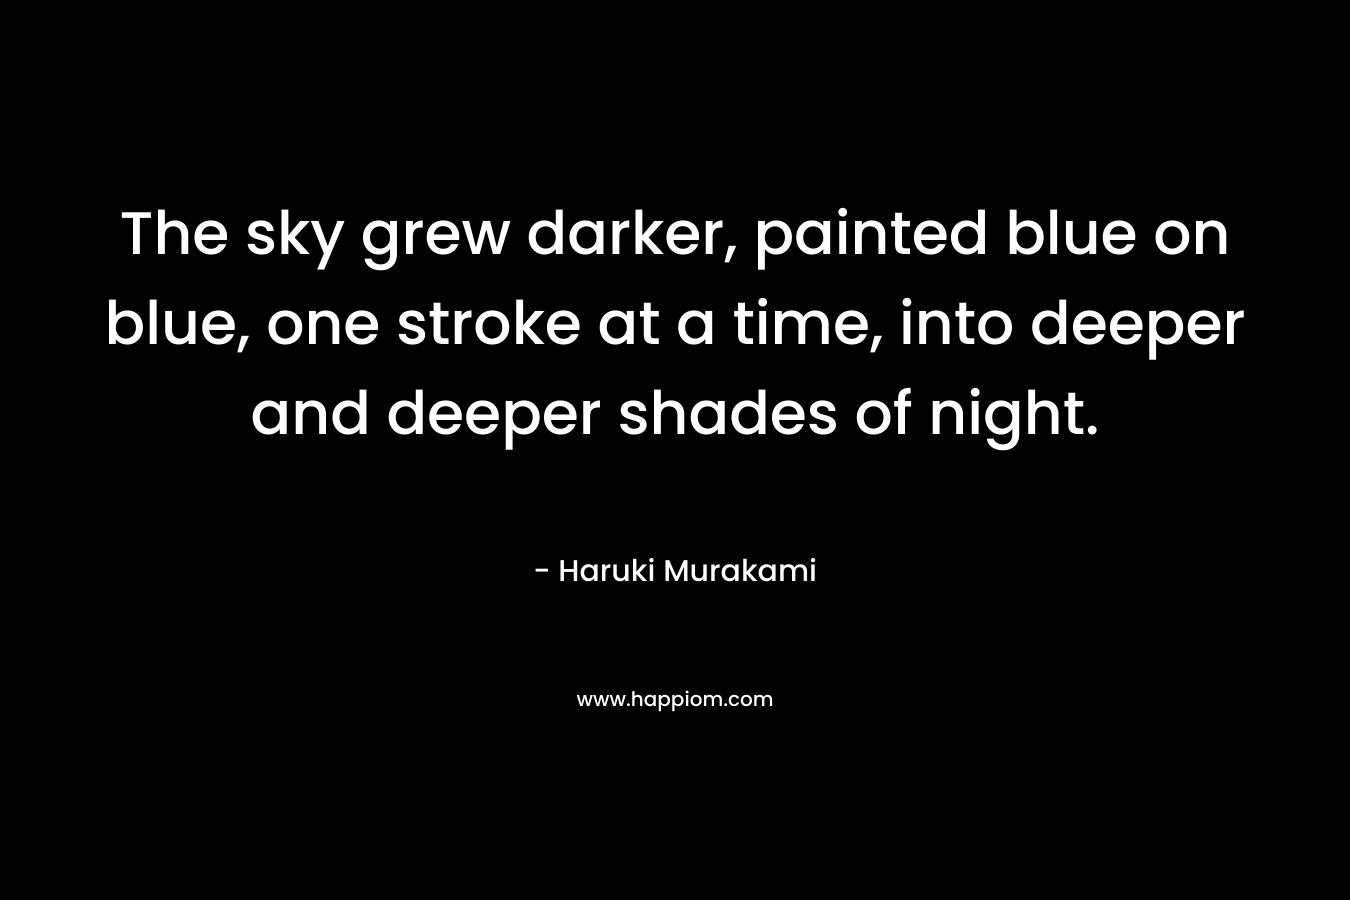 The sky grew darker, painted blue on blue, one stroke at a time, into deeper and deeper shades of night. – Haruki Murakami